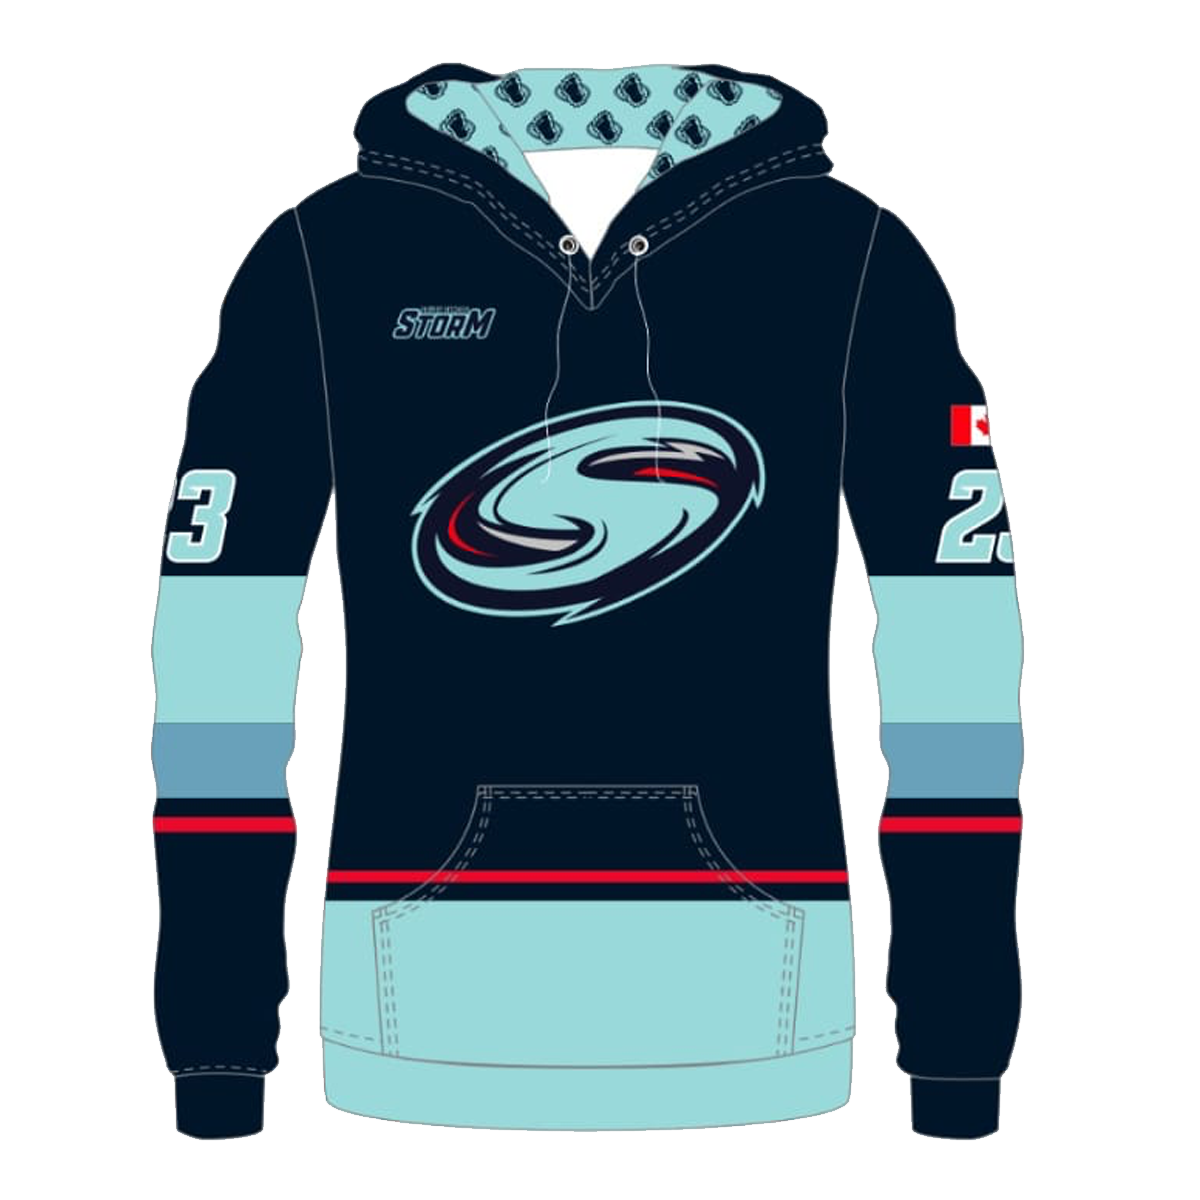 South Simcoe STORM Personalized Player Hoodie